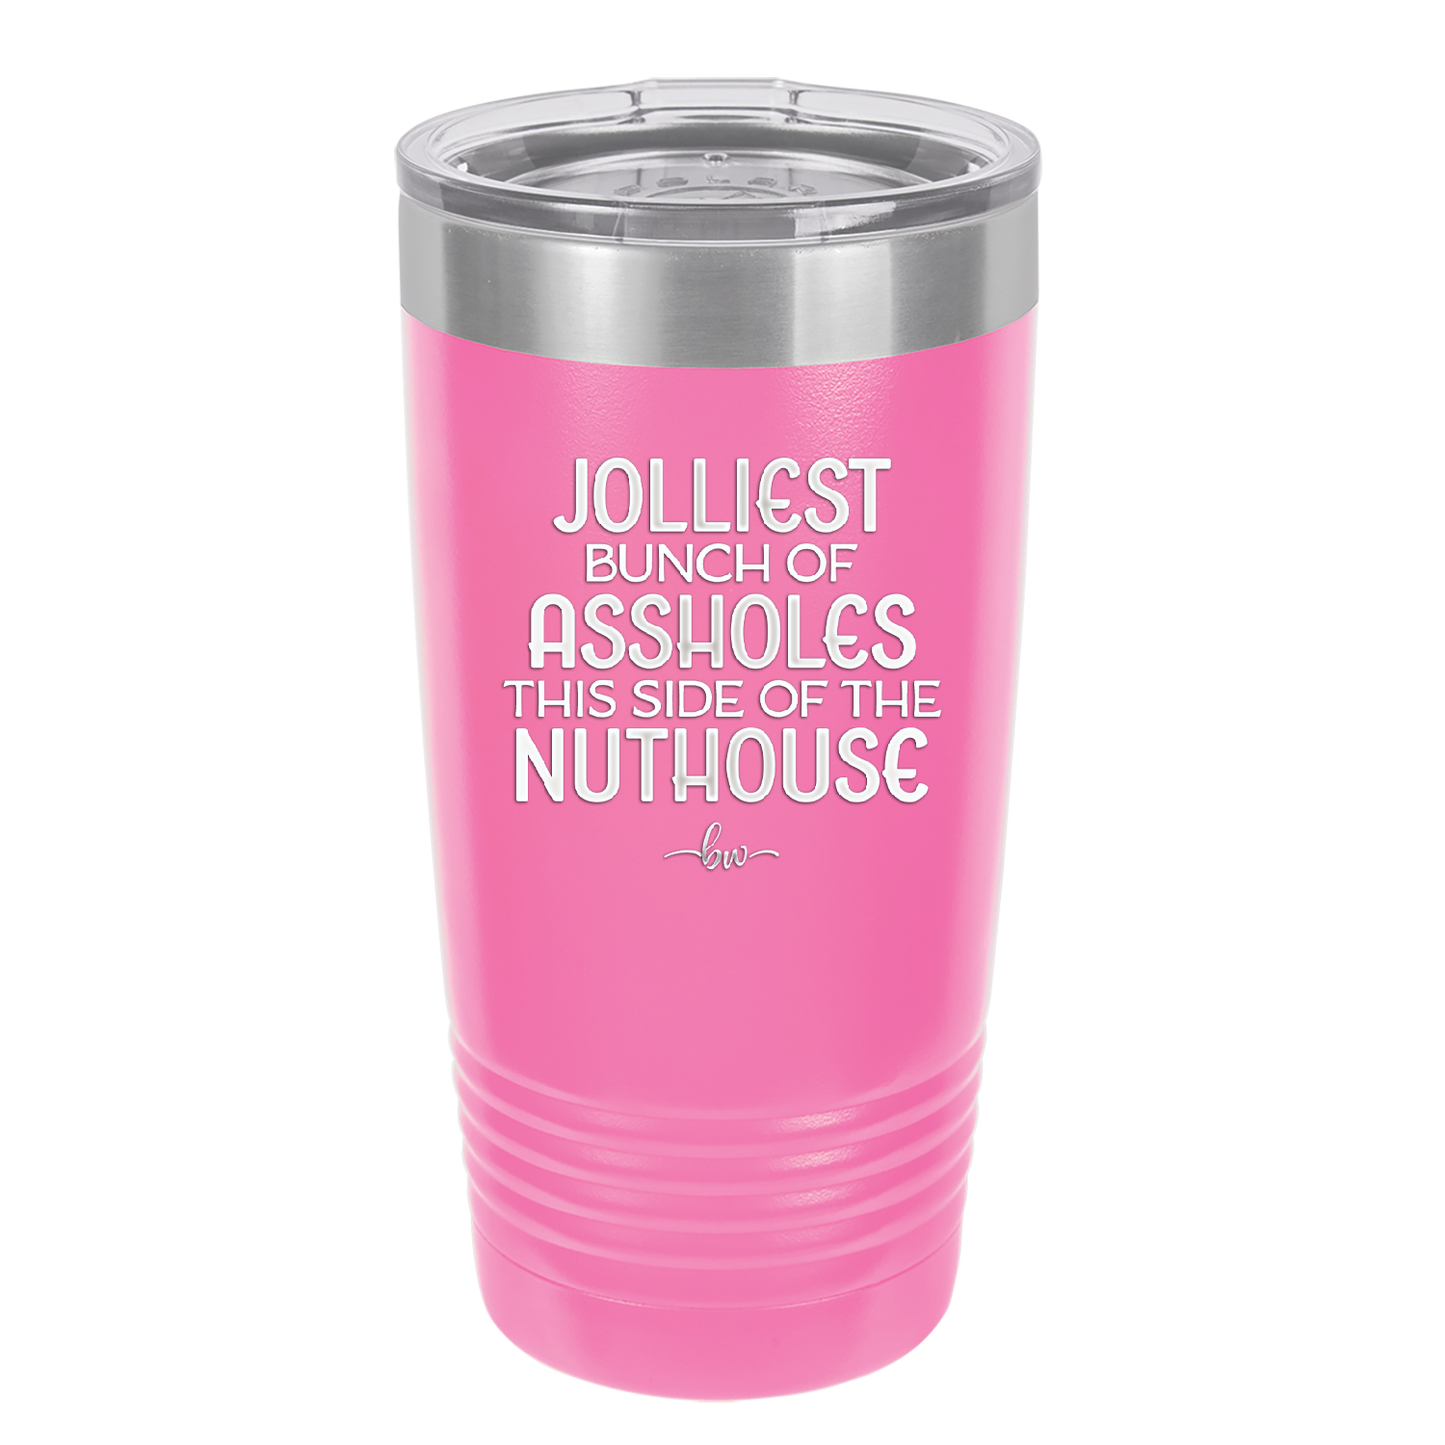 Jolliest Bunch of Assholes This Side of the Nuthouse - Laser Engraved Stainless Steel Drinkware - 2392 -